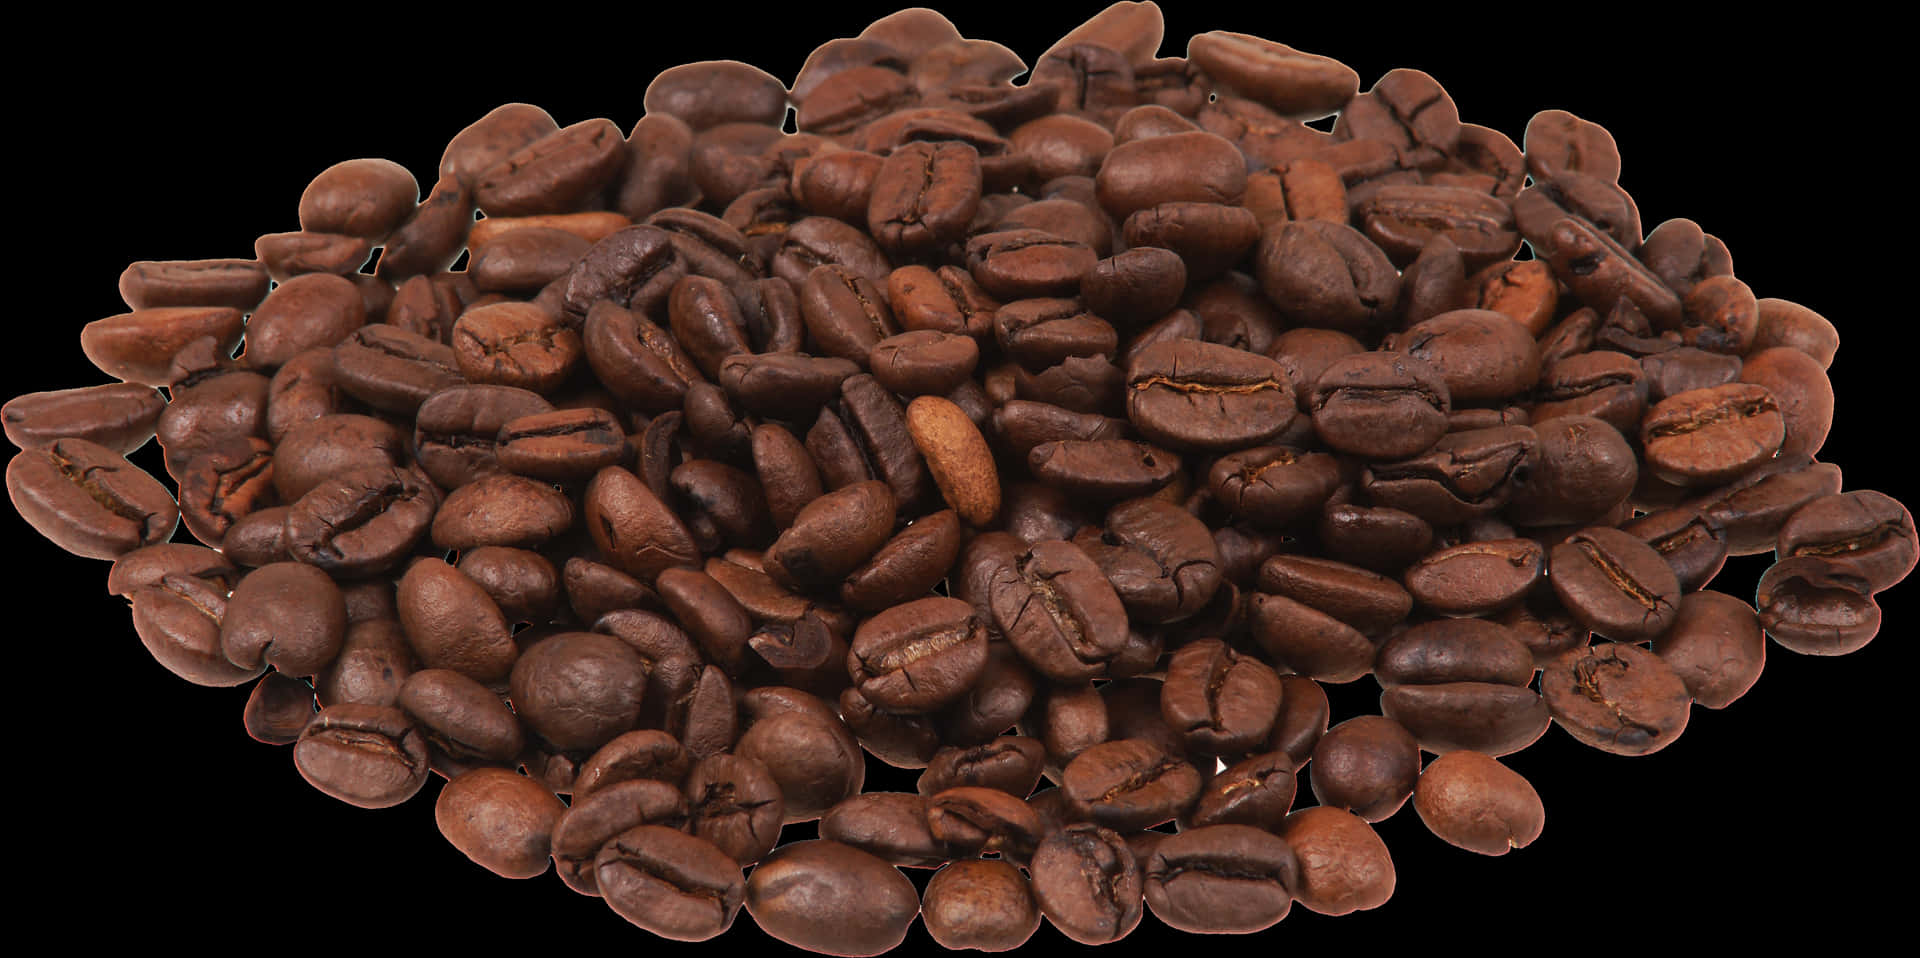 Fresh Roasted Coffee Beans Texture PNG image